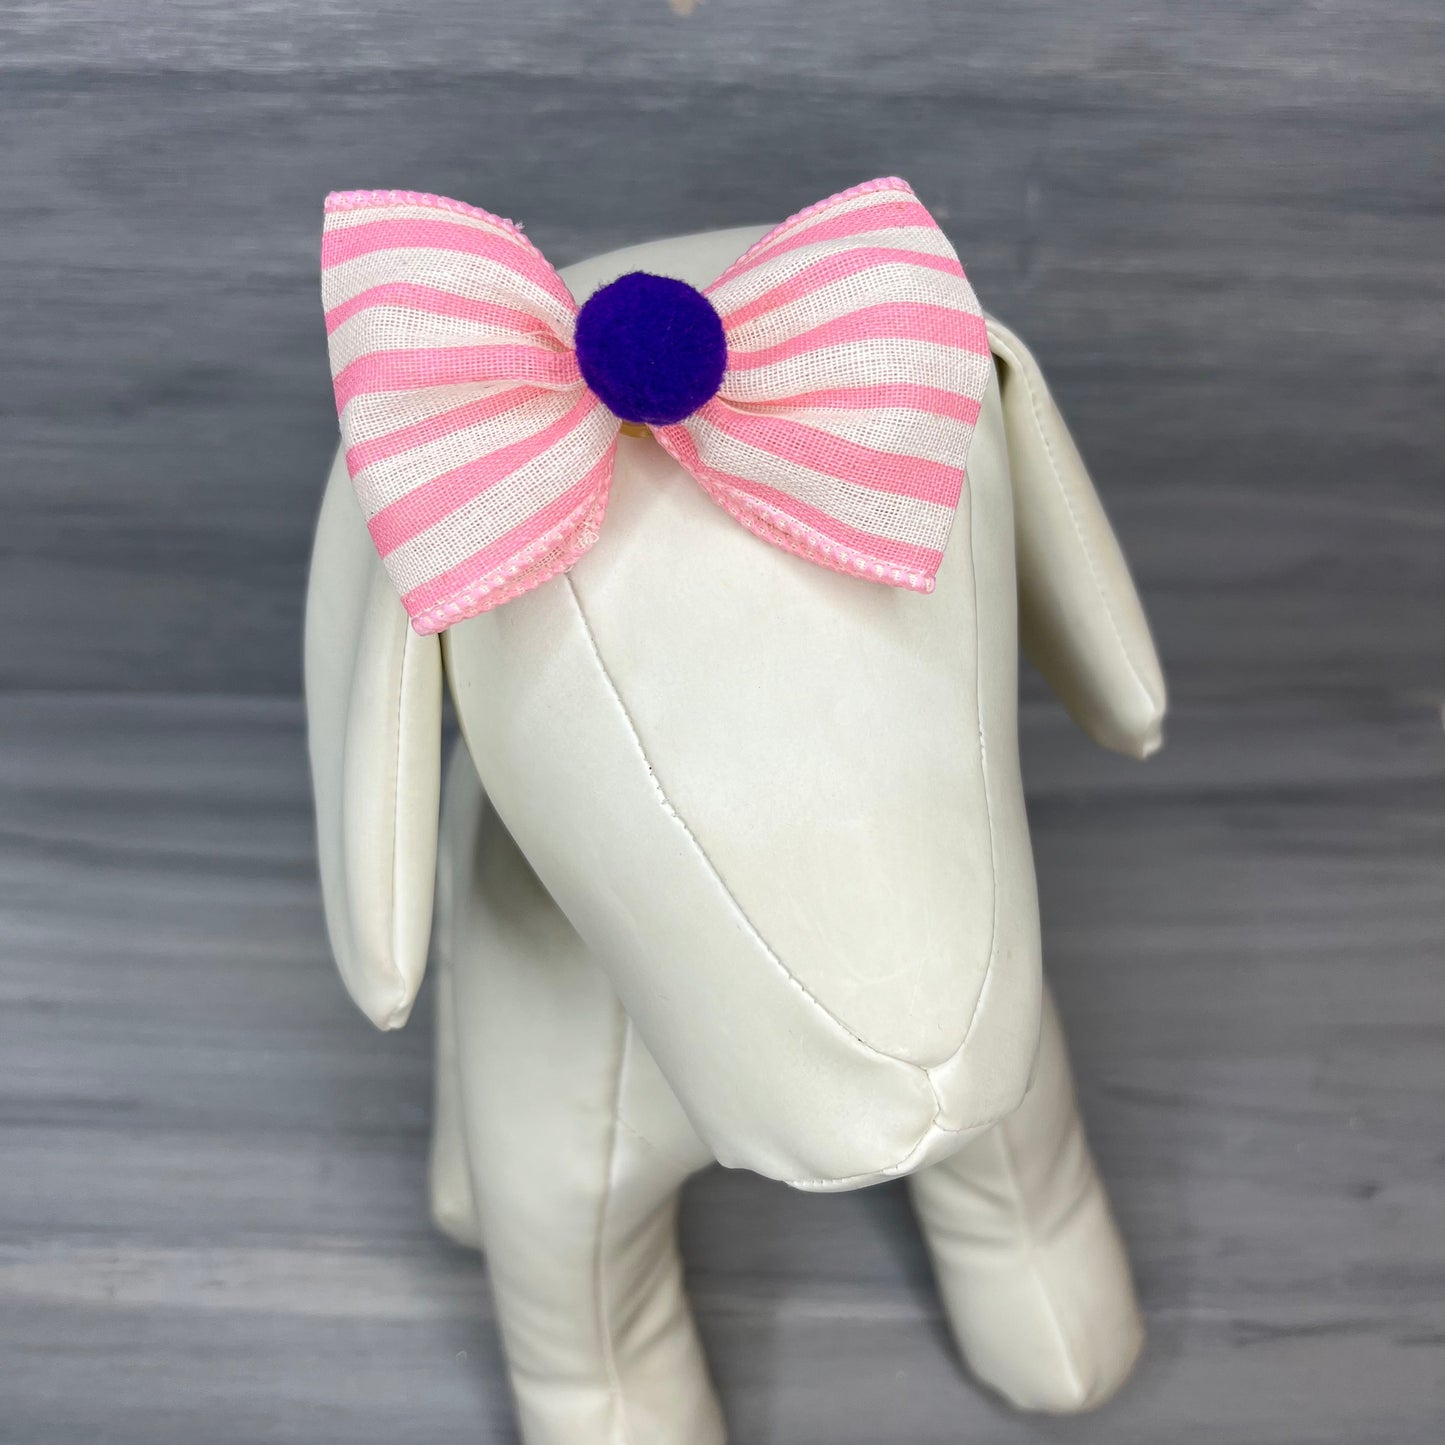 Pinkies - Over the Top - 6 Large Bows